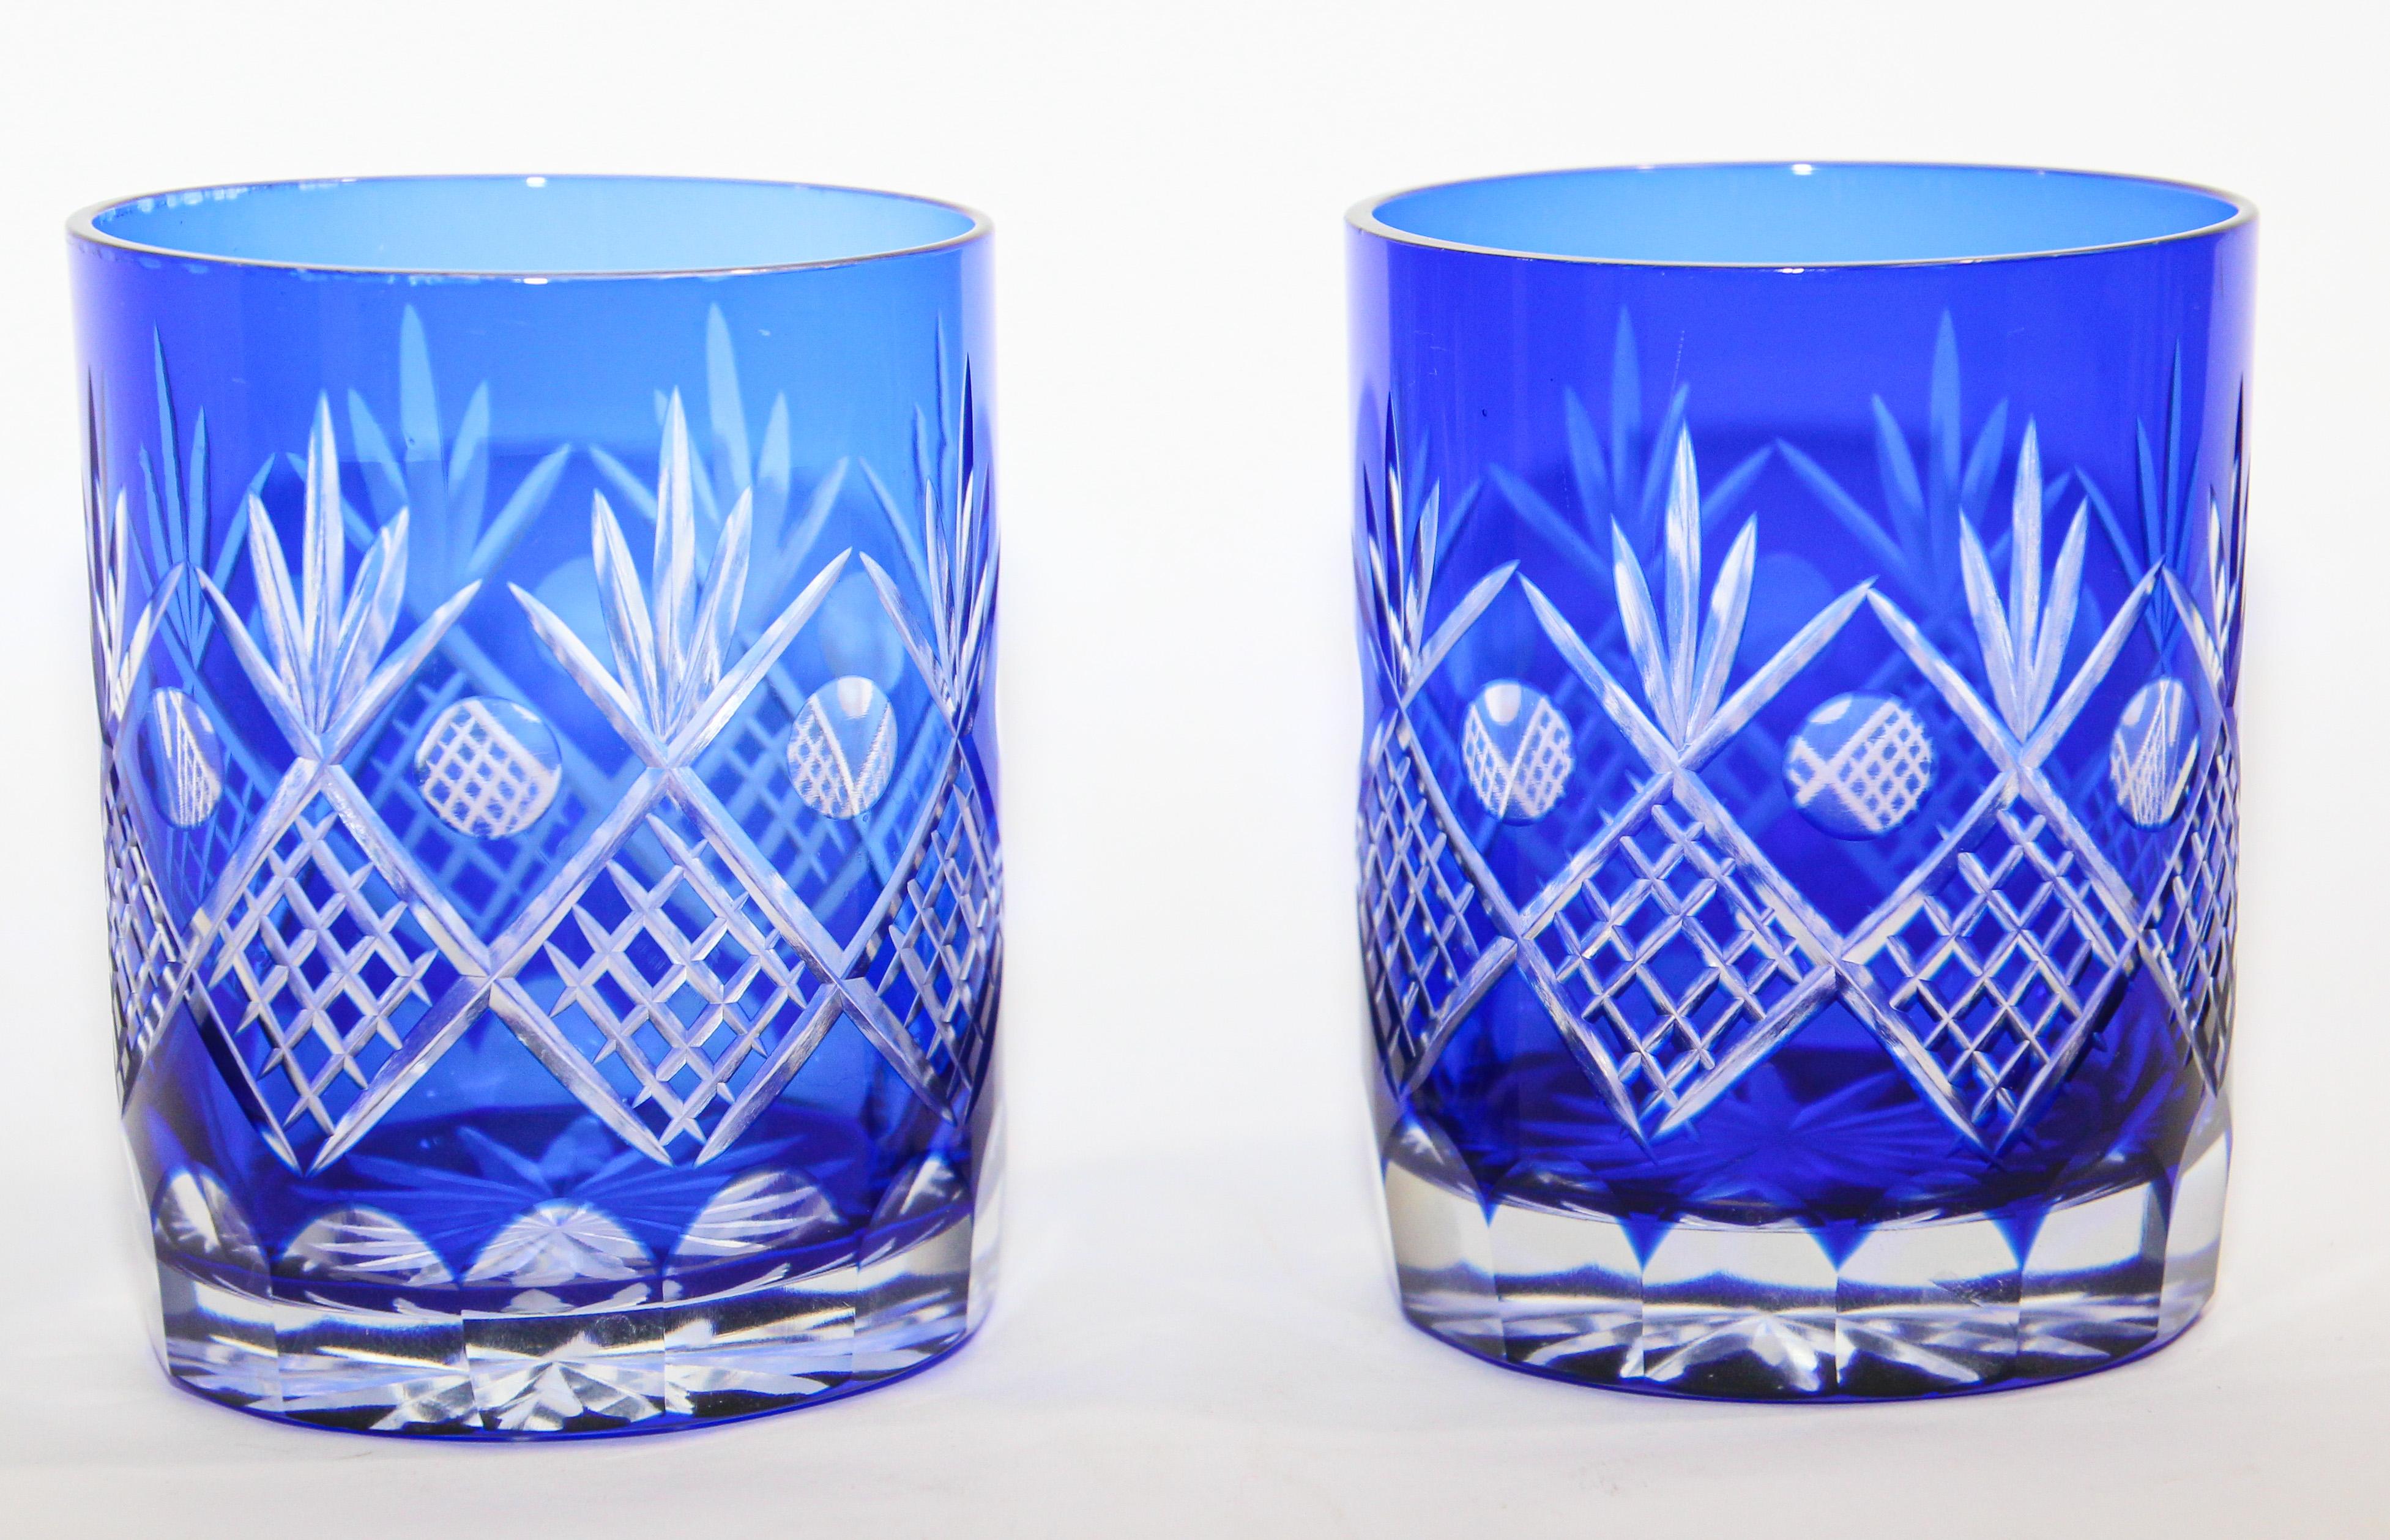 Set of 2 vintage whiskey glasses tumbler cobalt blue crystal Baccarat style. 
The vibrant hand blown rich sapphire blue jewel sapphire blue crystal glass is cut to clear to reveal a lovely pattern with clean lines. 
Set of rock whiskey juice or